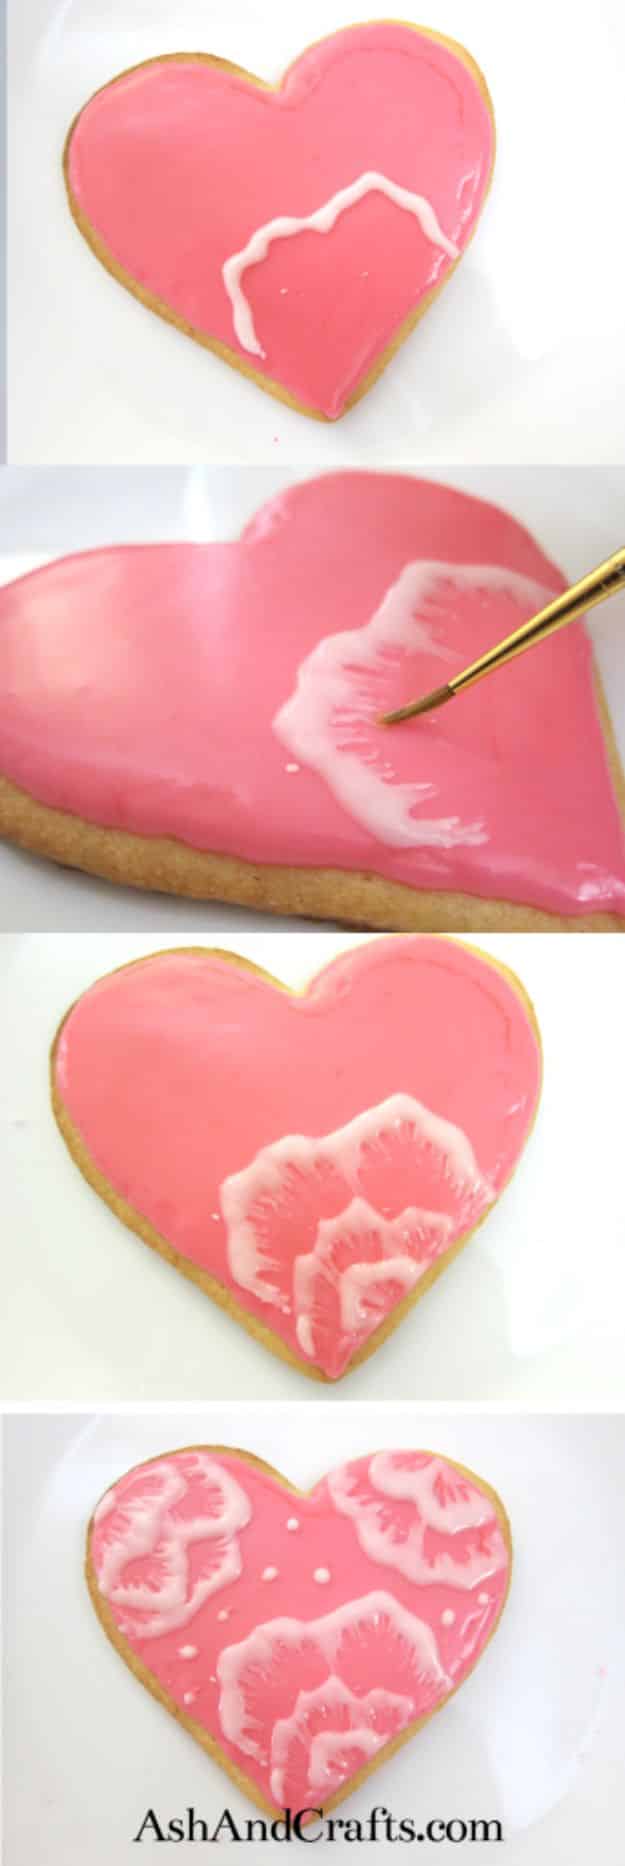 Cool Cookie Decorating Ideas - Brush Embroidery On Cookies - Easy Ways To Decorate Cute, Adorable Cookies - Quick Recipes and Simple Decorating Tips With Icing, Candy, Chocolate, Buttercream Frosting and Fruit - Best Party Trays and Cookie Arrangements #recipes